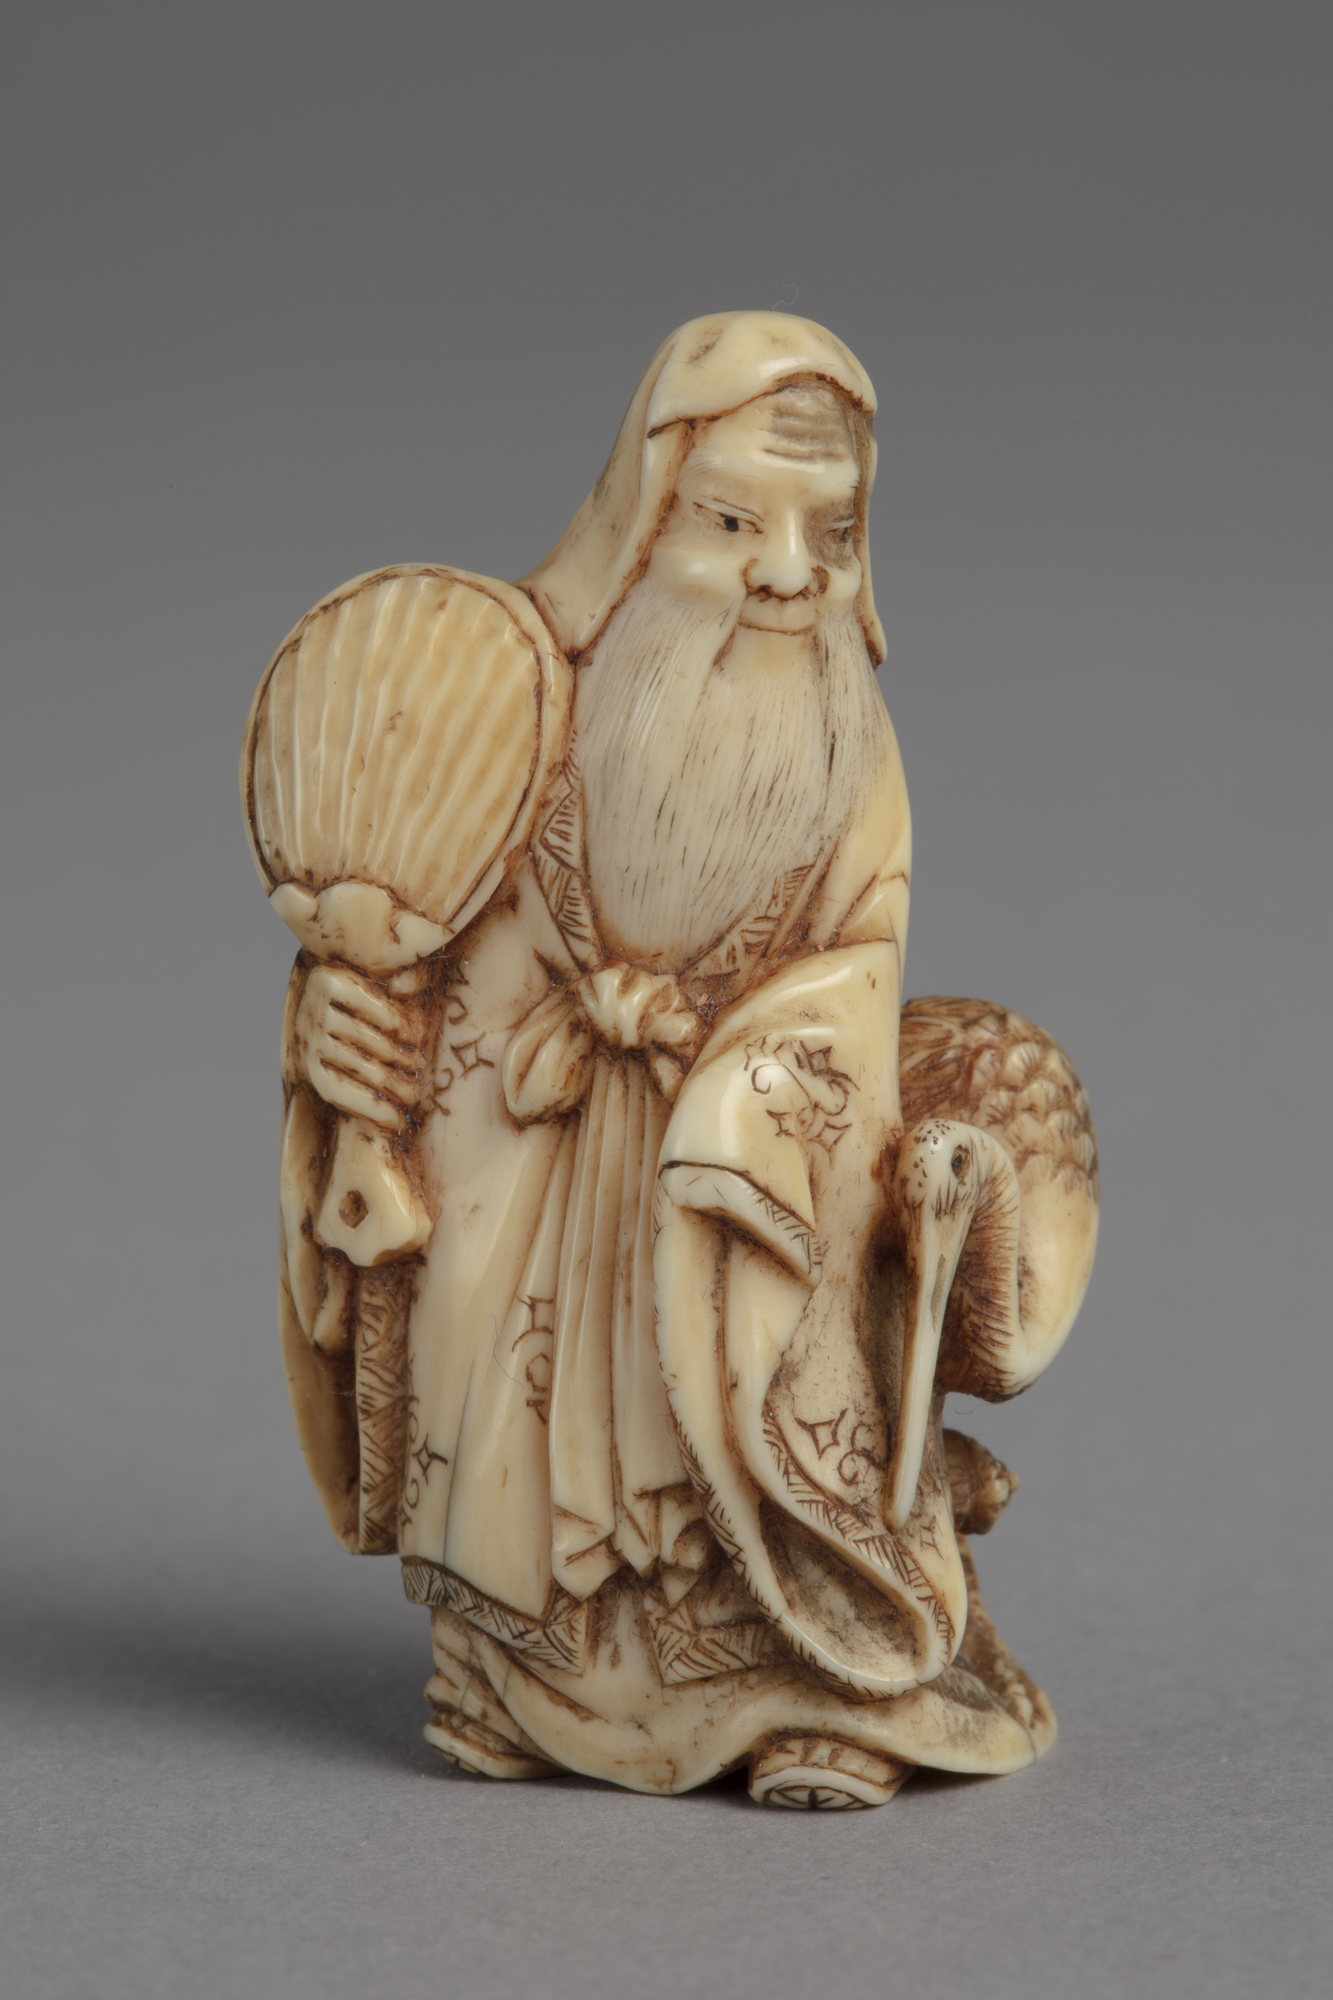 A Japanese ivory netsuke of Fukurokuju a god of wisdom. He stands holds a fan in his right hand, a stork by his left side.